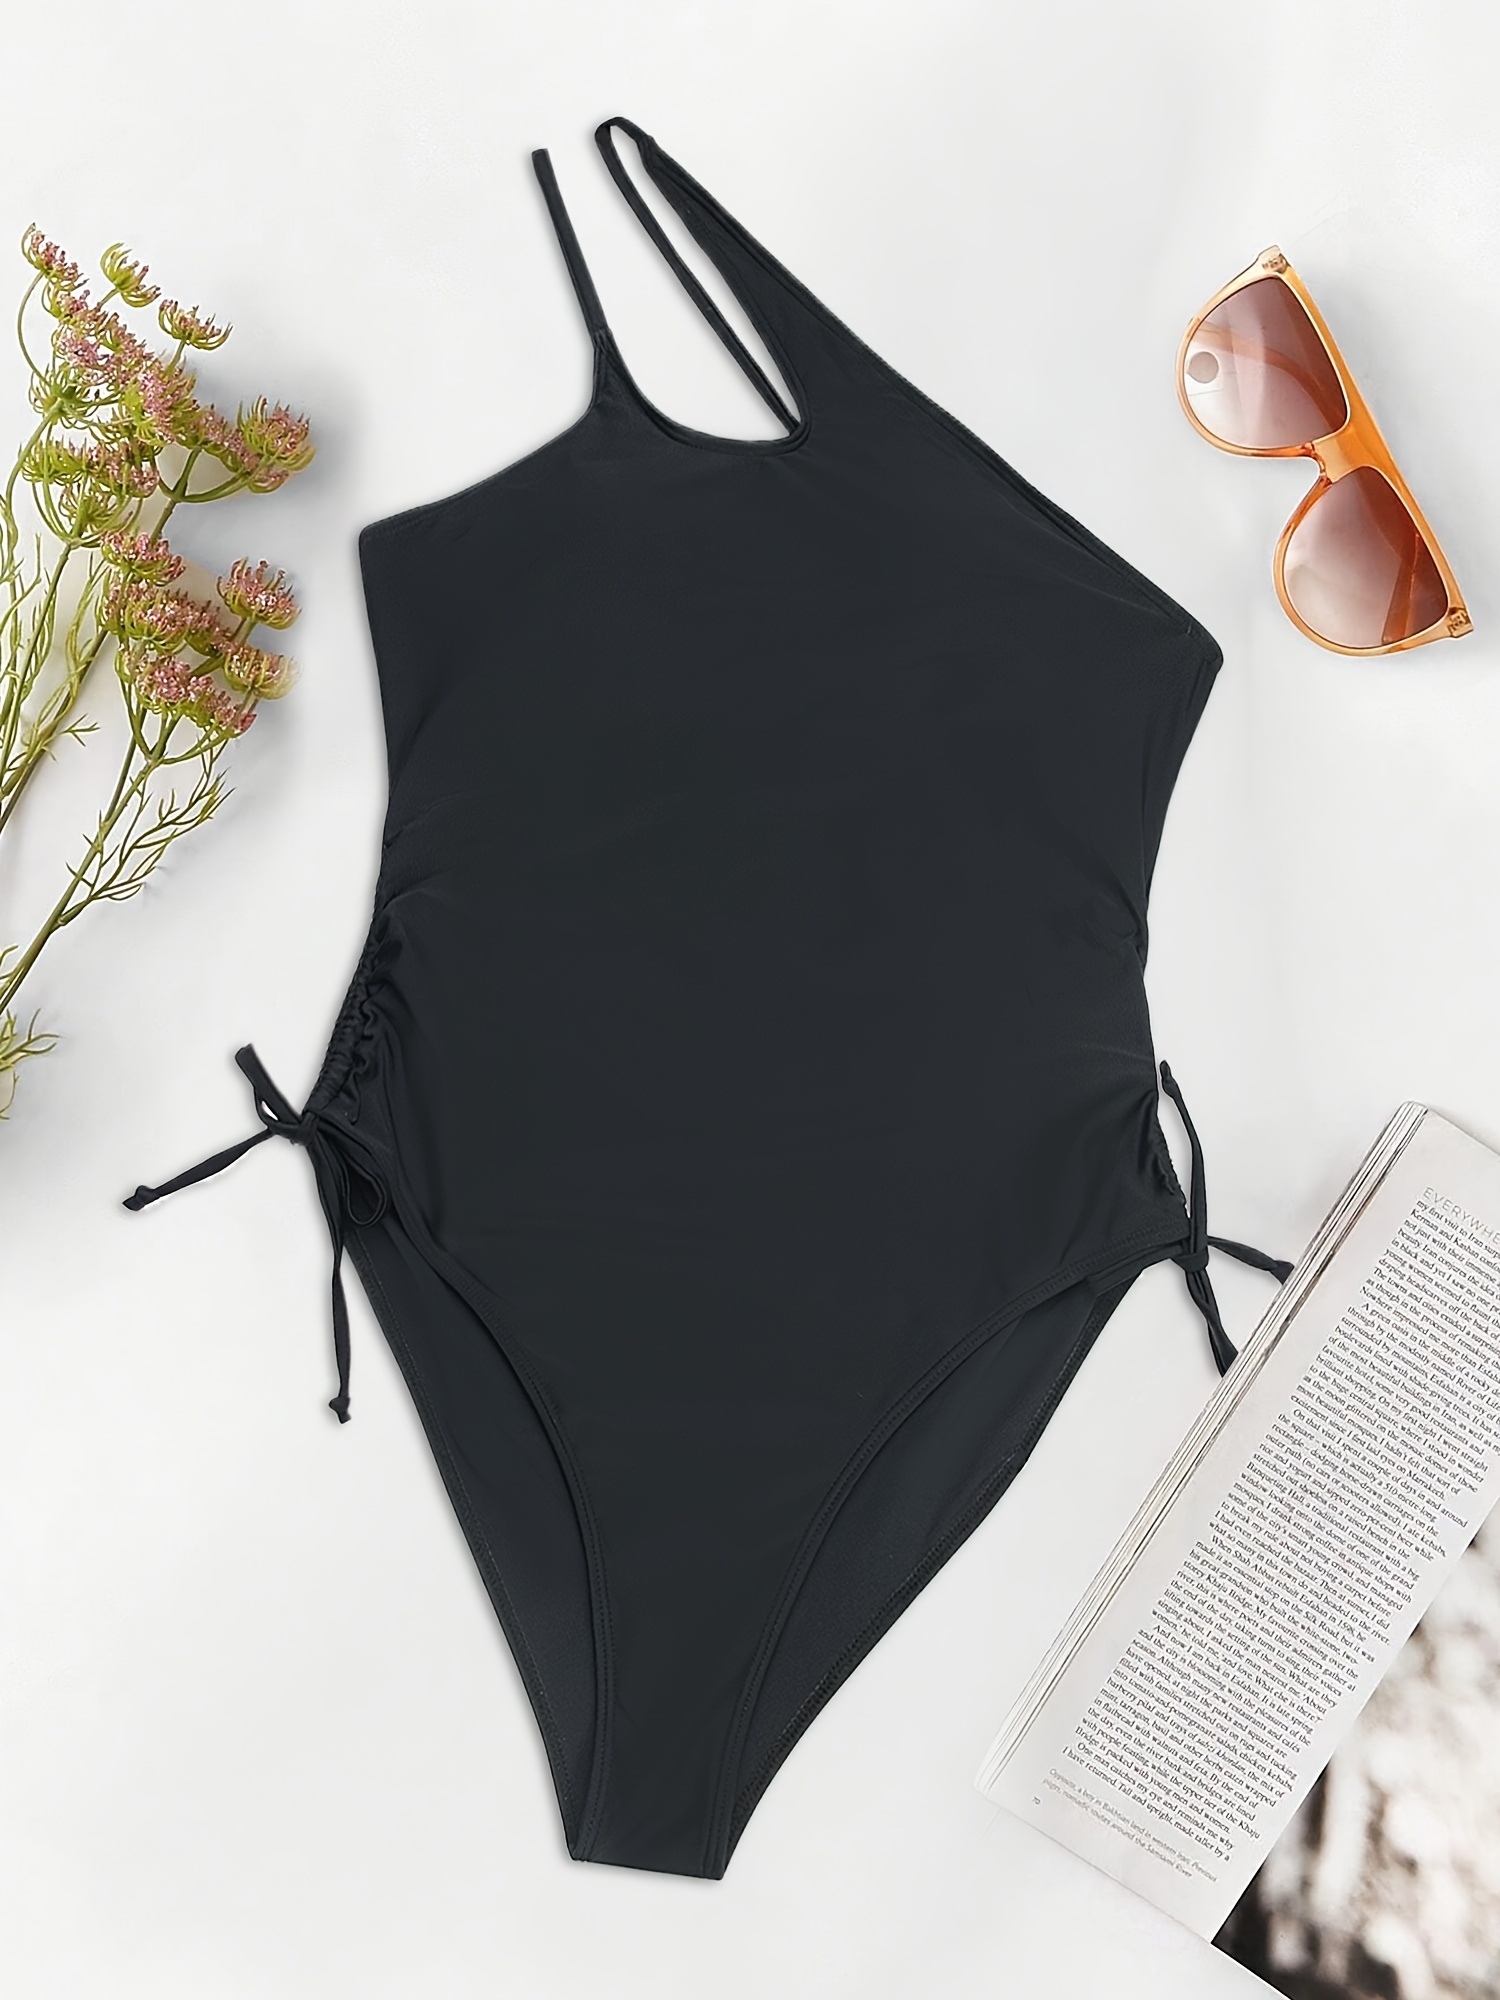 Swimsuits (From !) That Flatter Asymmetrical Breasts - The